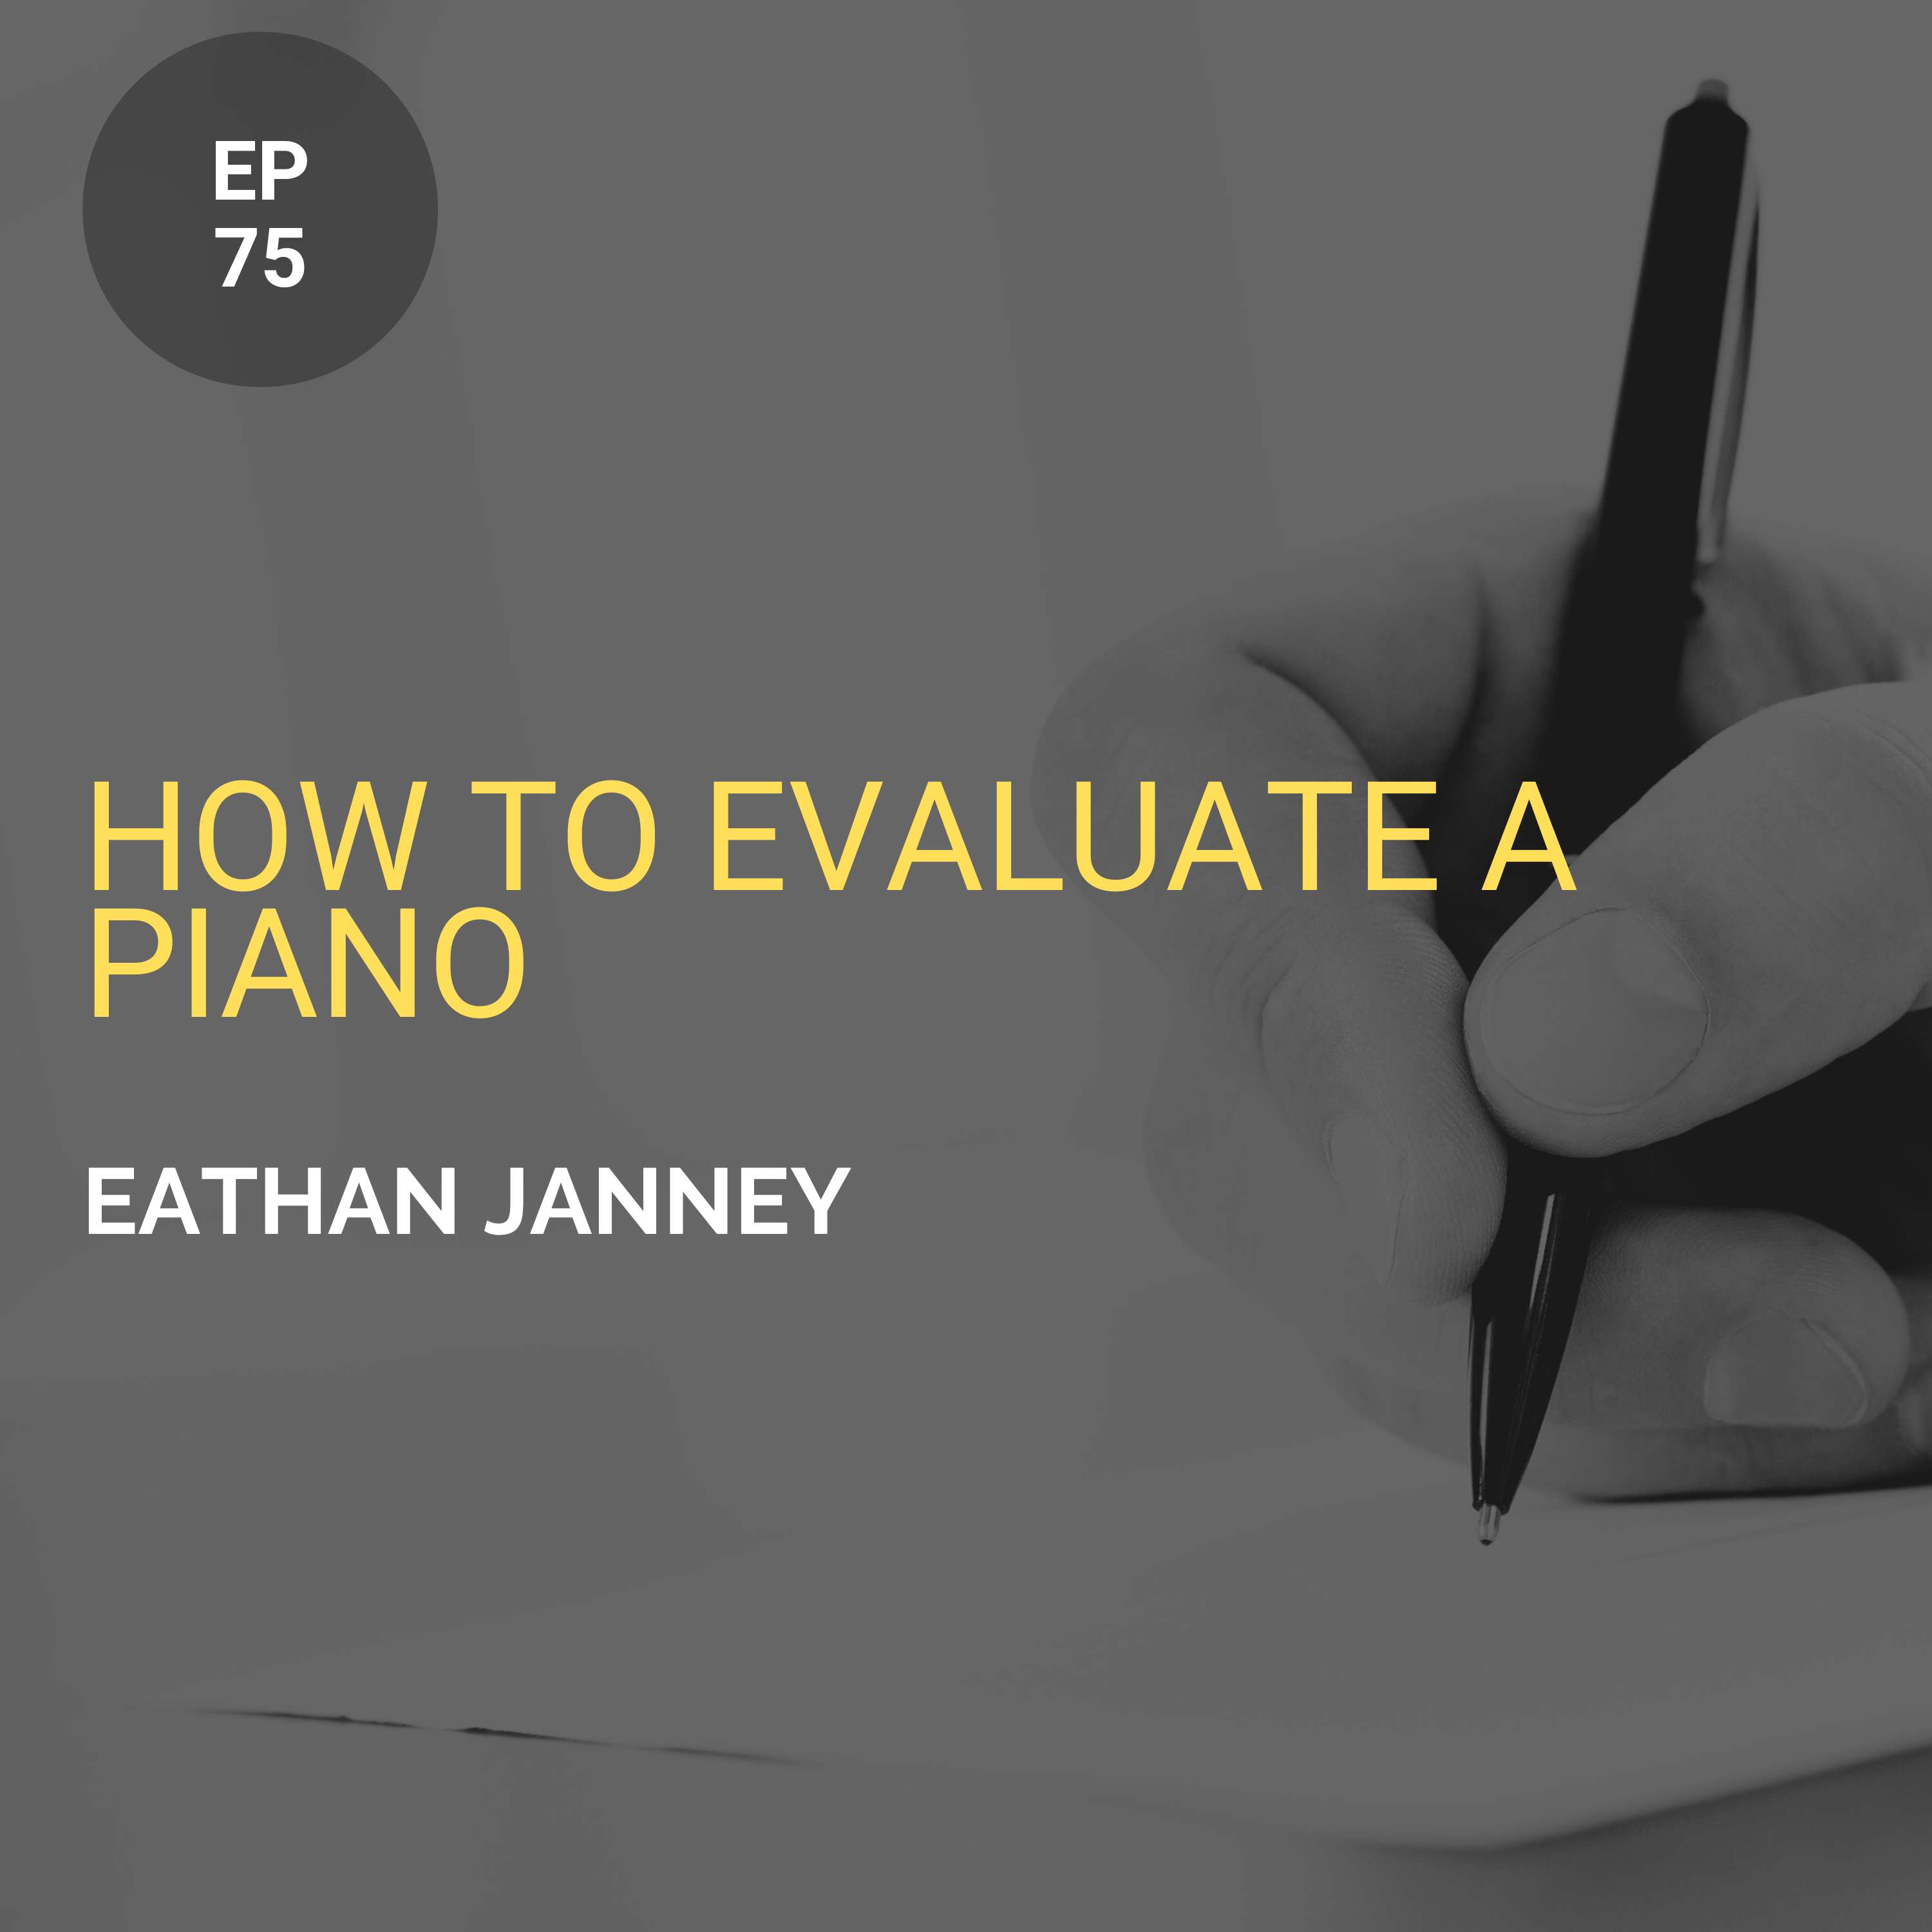 How to Evaluate a Piano w/ Eathan Janney